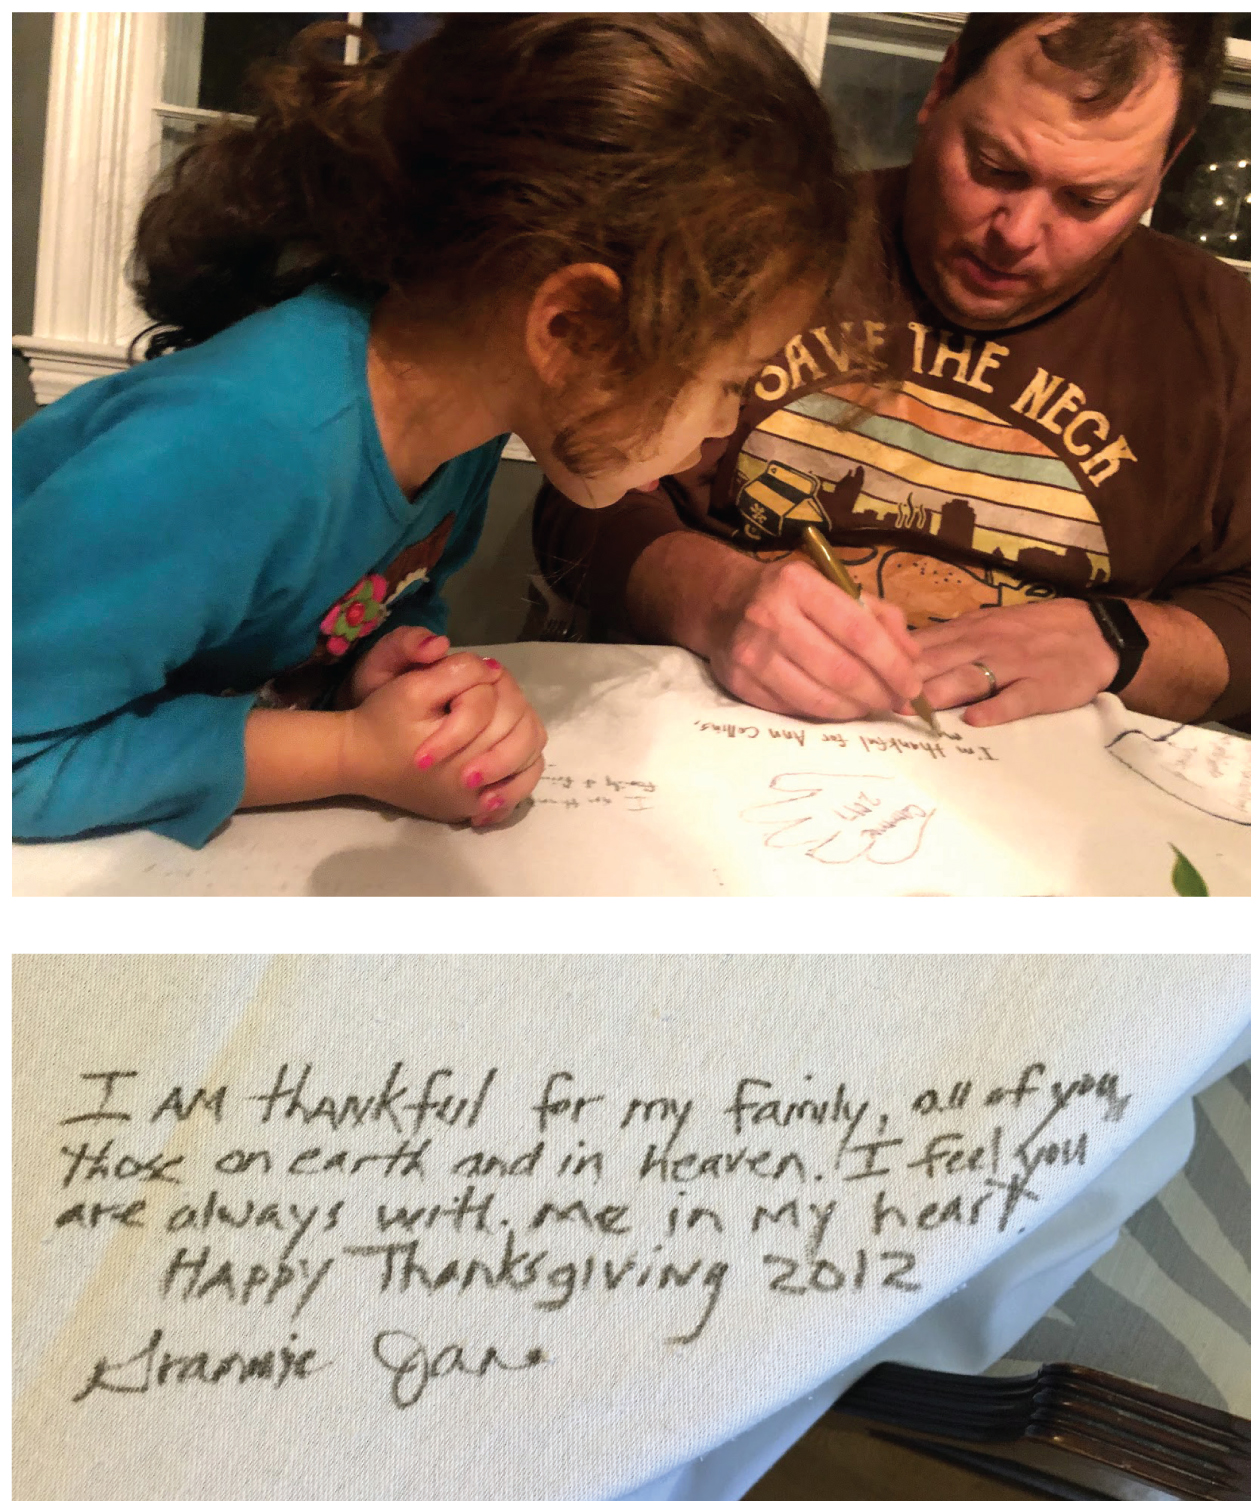 Cristy and David Marshall have covered their Thanksgiving table with the same inexpensive white tablecloth for 14 years, asking family and guests to write what they are thankful for directly on the cloth. They now spend several days before Thanksgiving rereading the past years’ comments before bringing out permanent markers to make new memories.